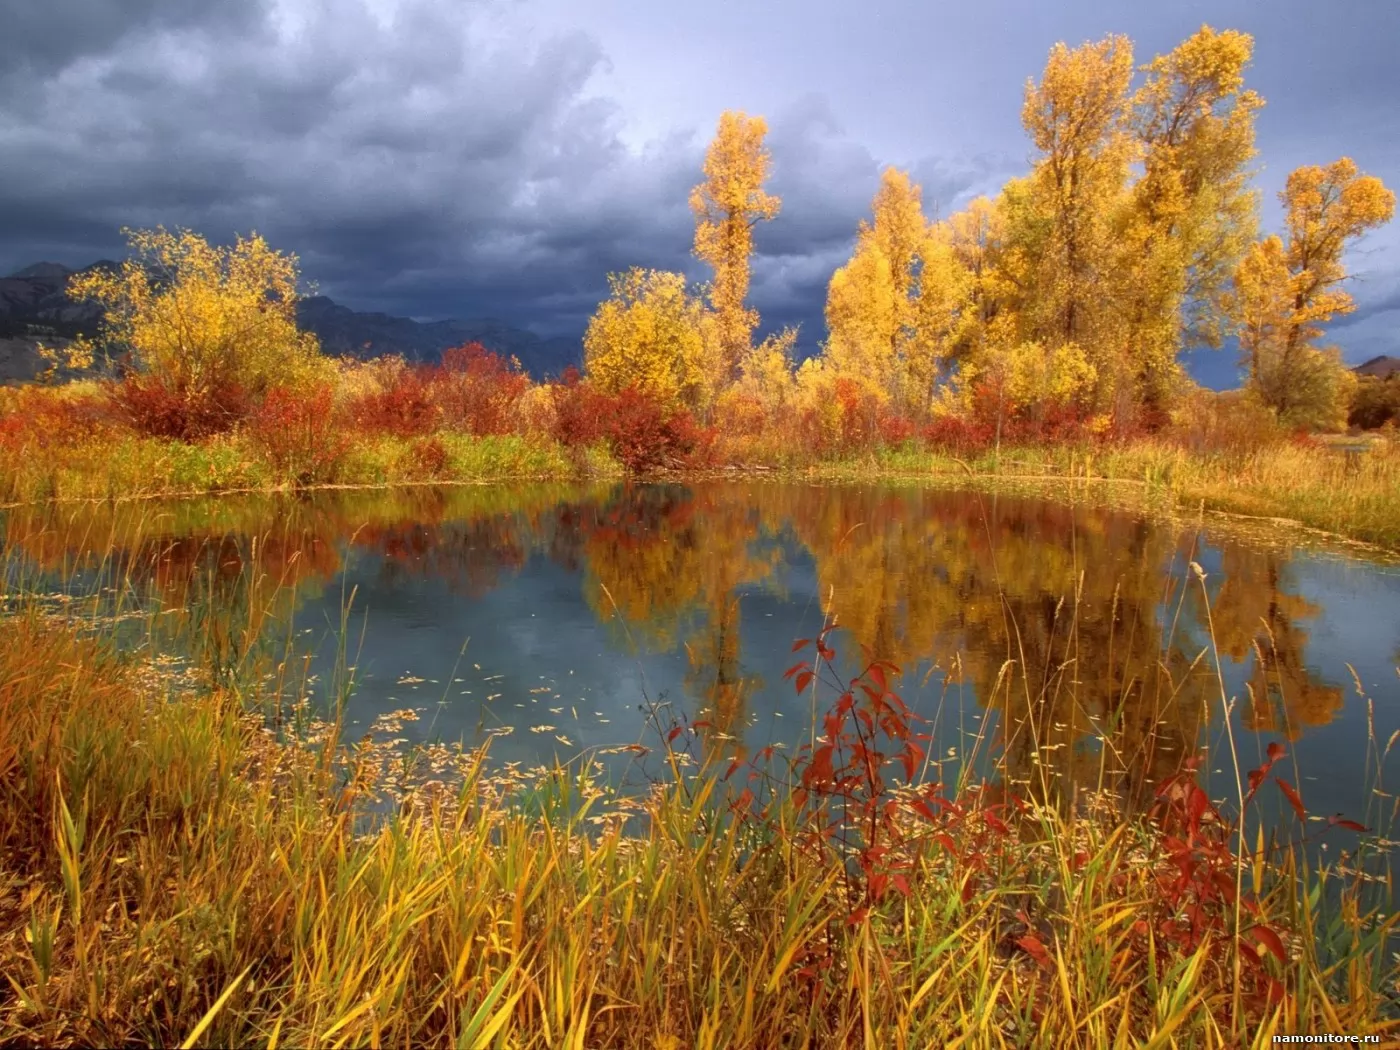 Autumn in forest, autumn, best, forest, golden, lake, landscapes, nature x